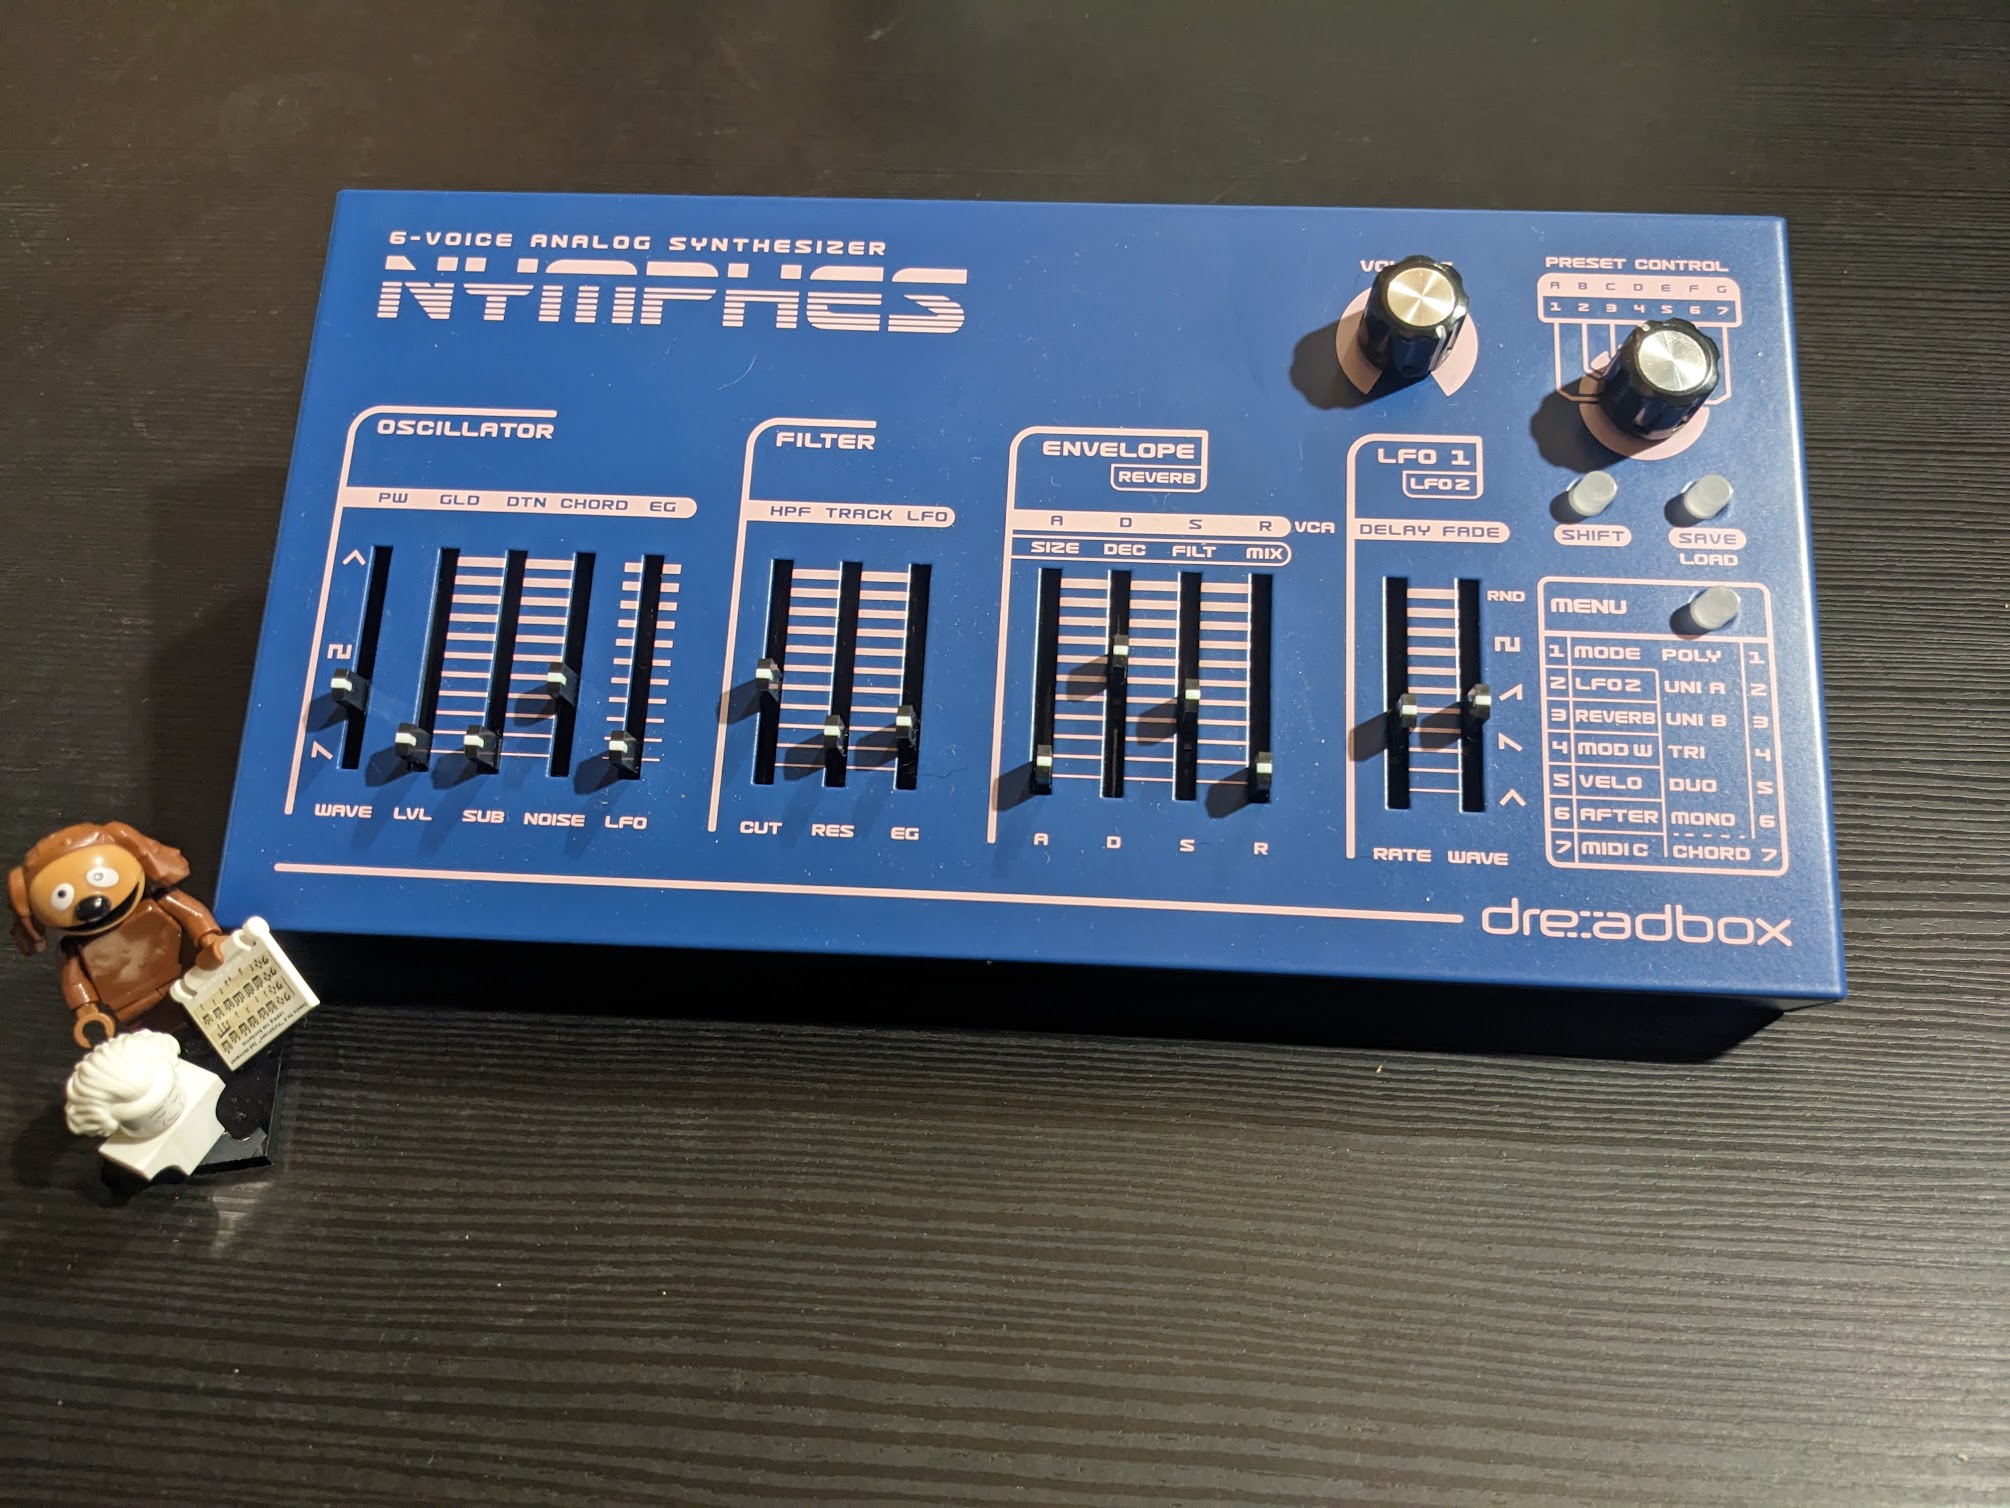 Nymphes Synthesizer